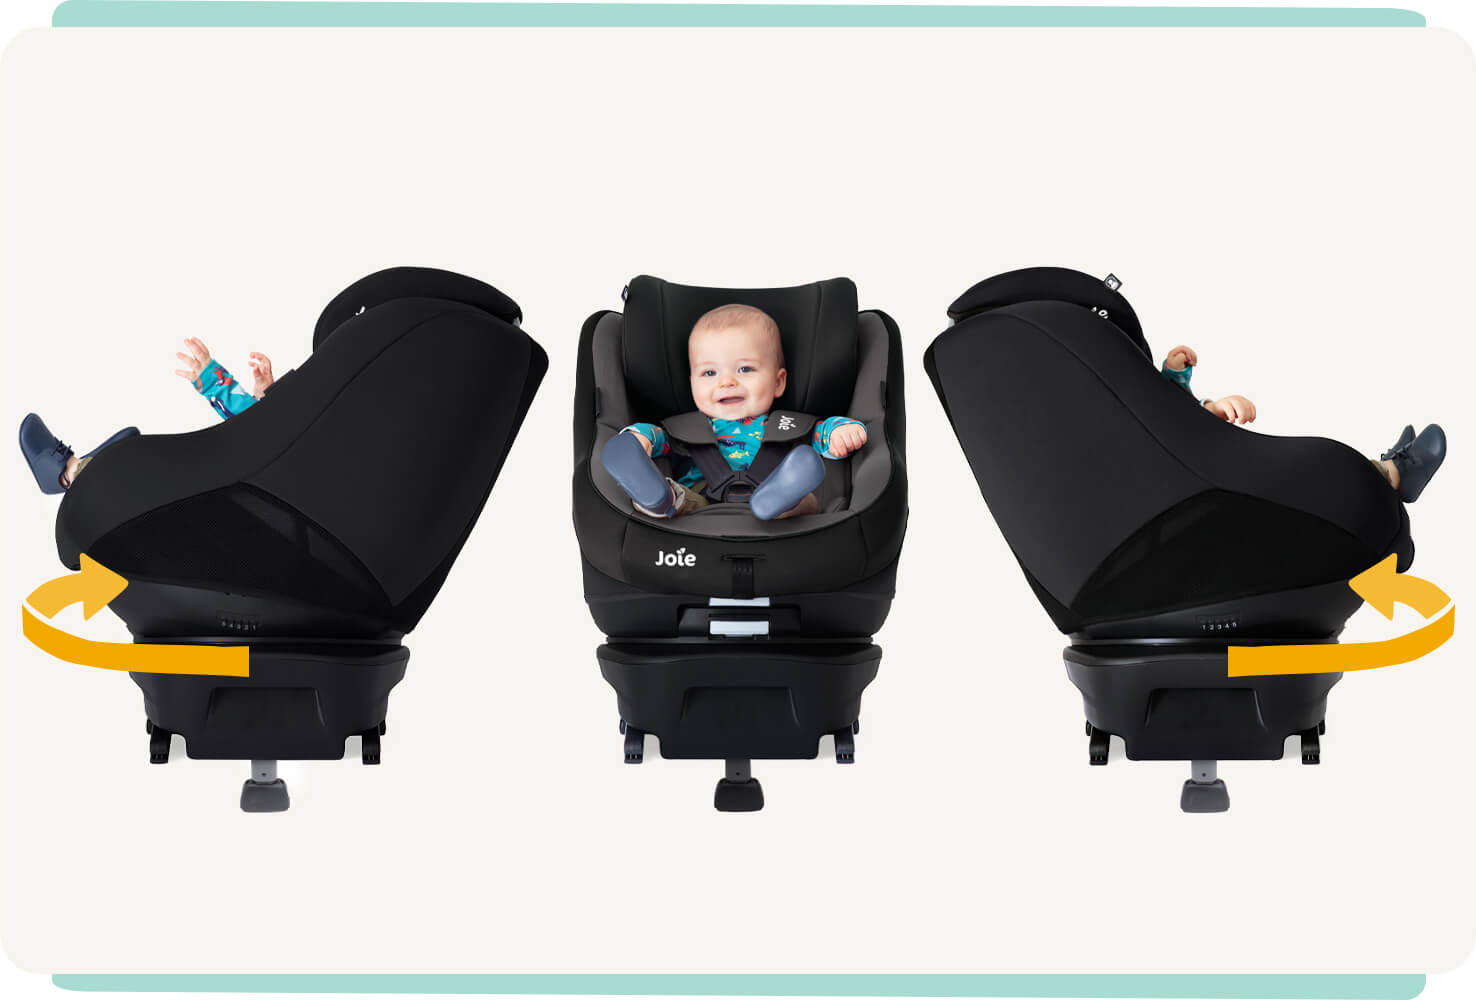  Joie spin 360 car seat in gray and black, three images with baby spinning left and right. 